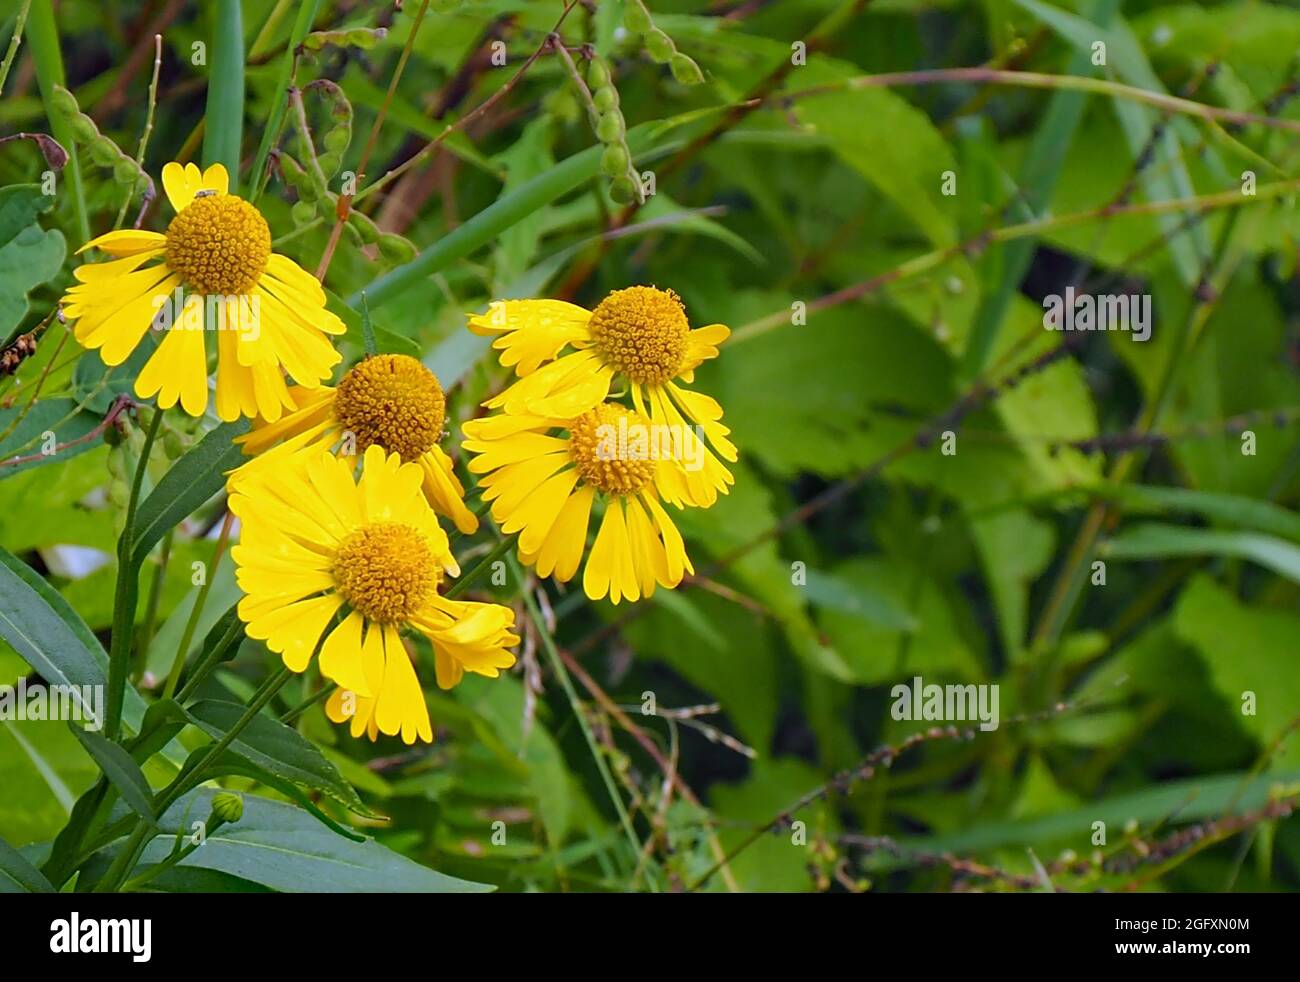 OLYMPUS DIGITAL CAMERA - Close-up of the yellow flowers on a sneezeweed plant growing in vegetation. Stock Photo